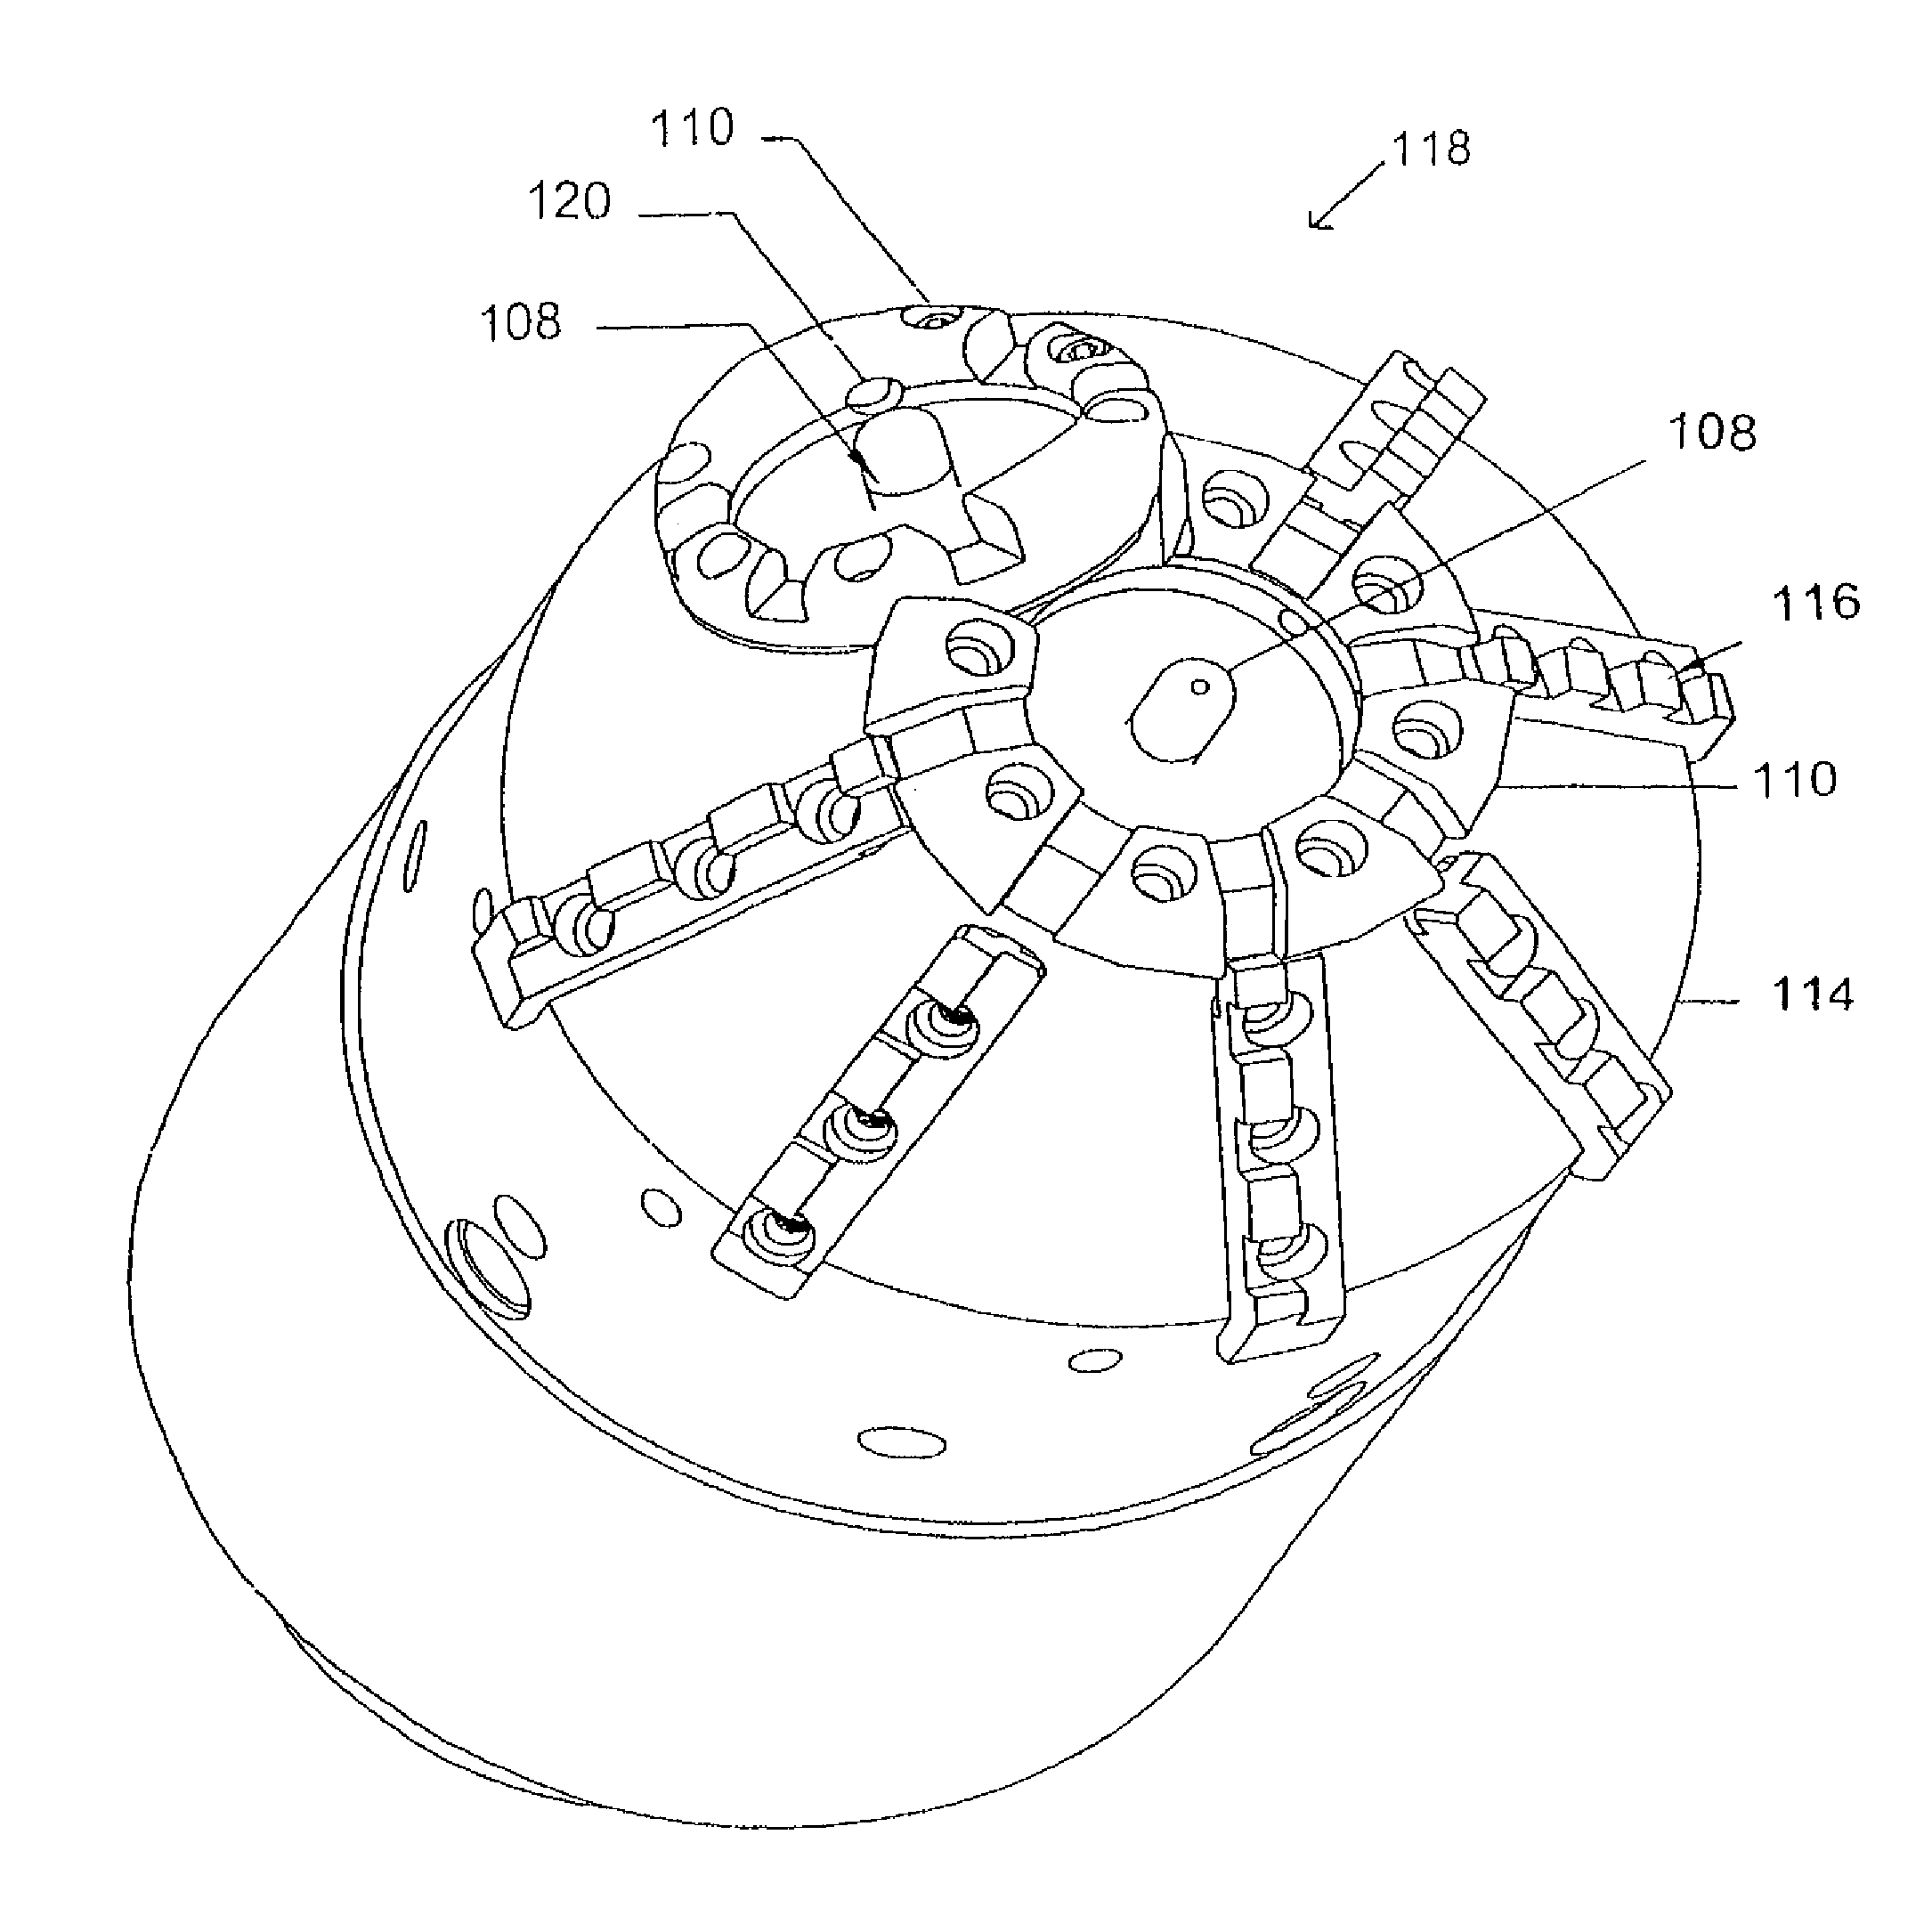 Pulsed electric rock drilling apparatus with non-rotating bit